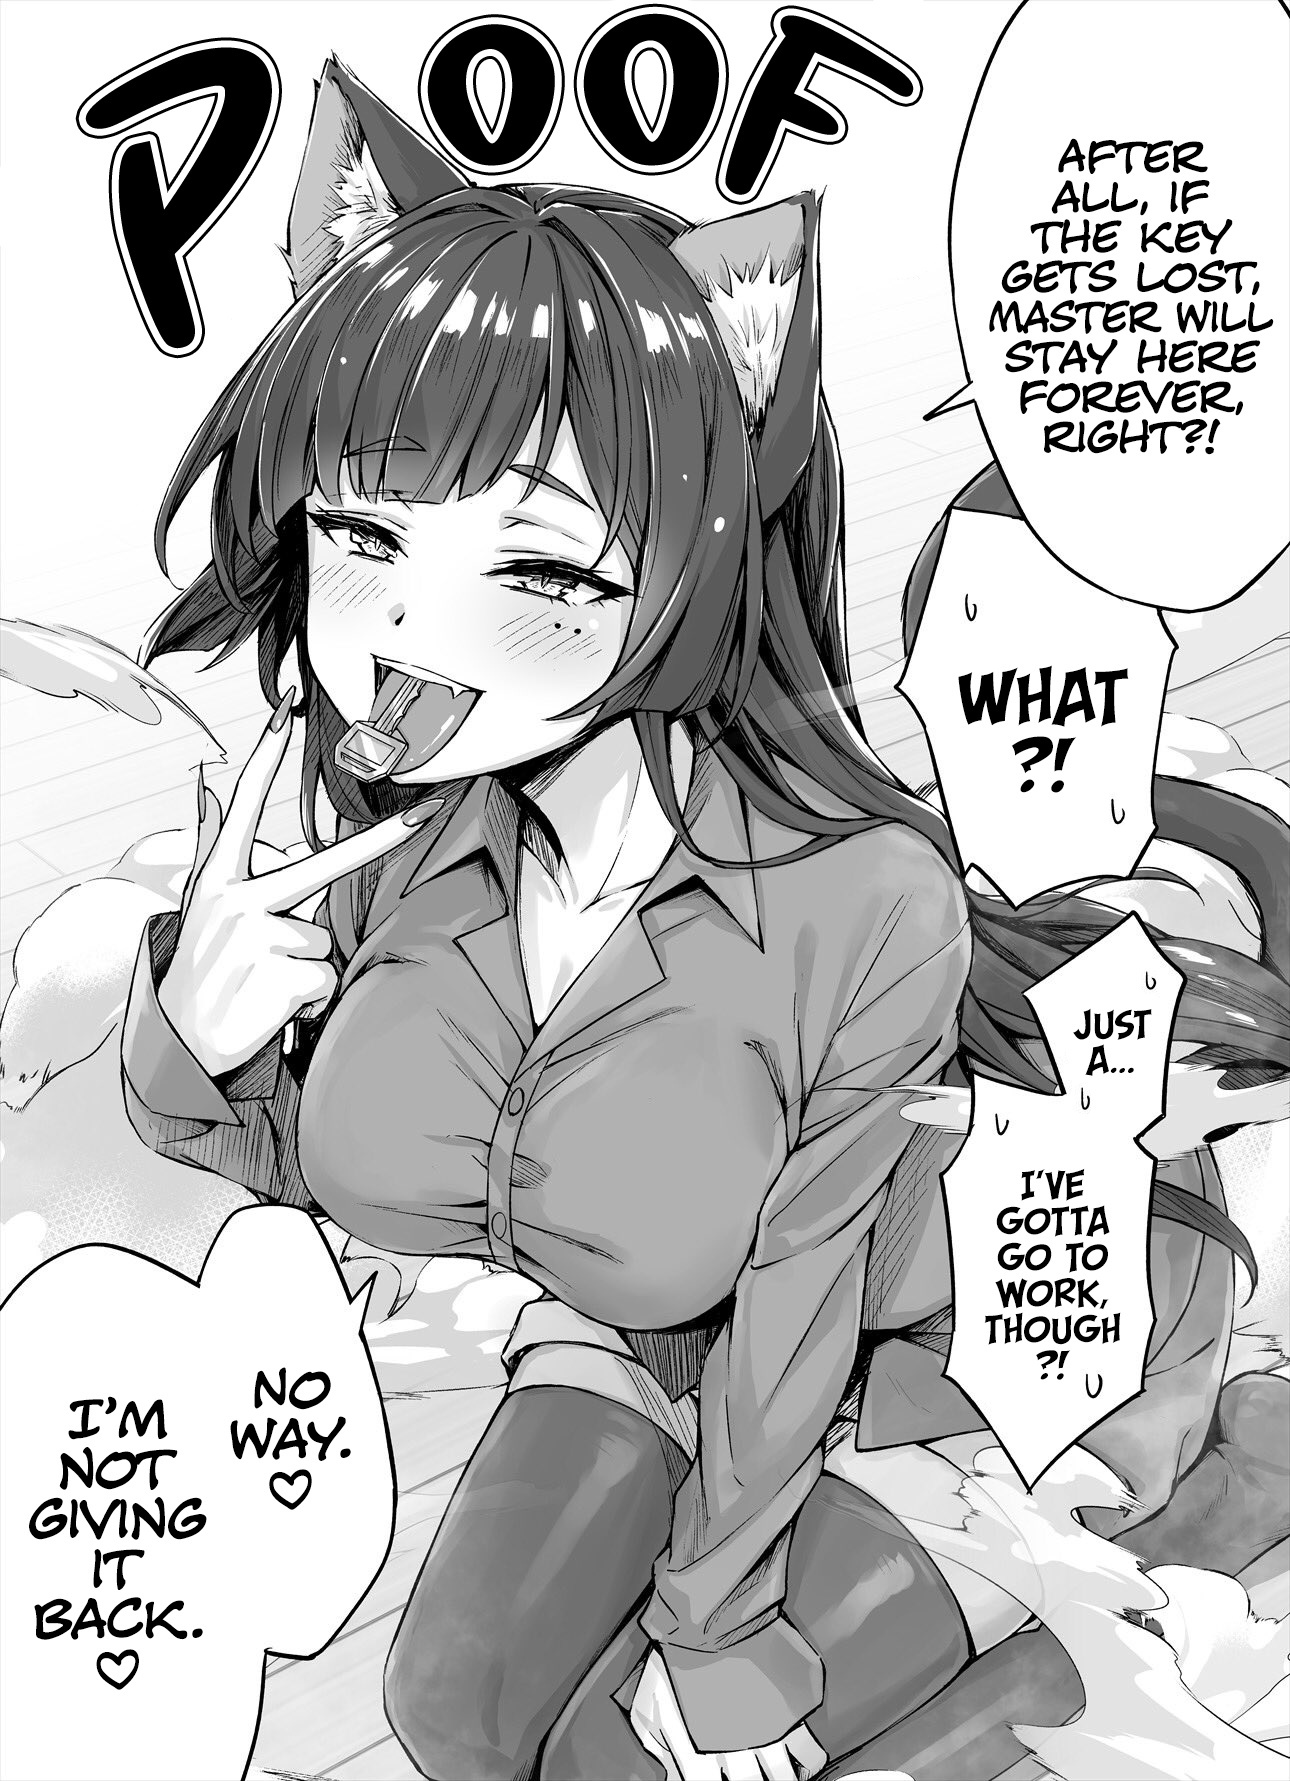 The Yandere Pet Cat Is Overly Domineering - Page 2